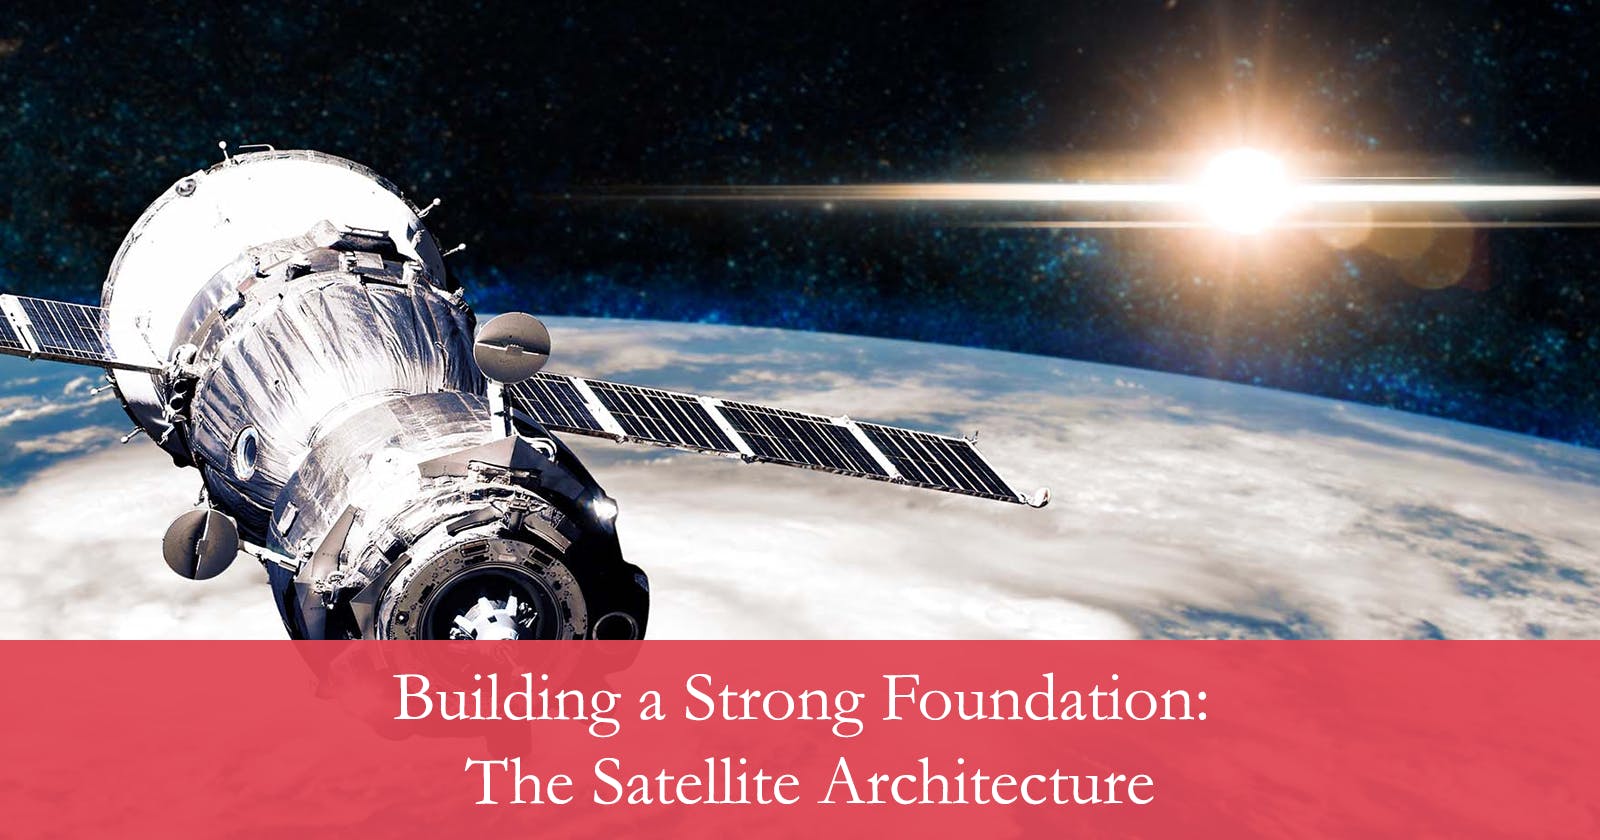 Building a Strong Foundation: The Satellite Architecture